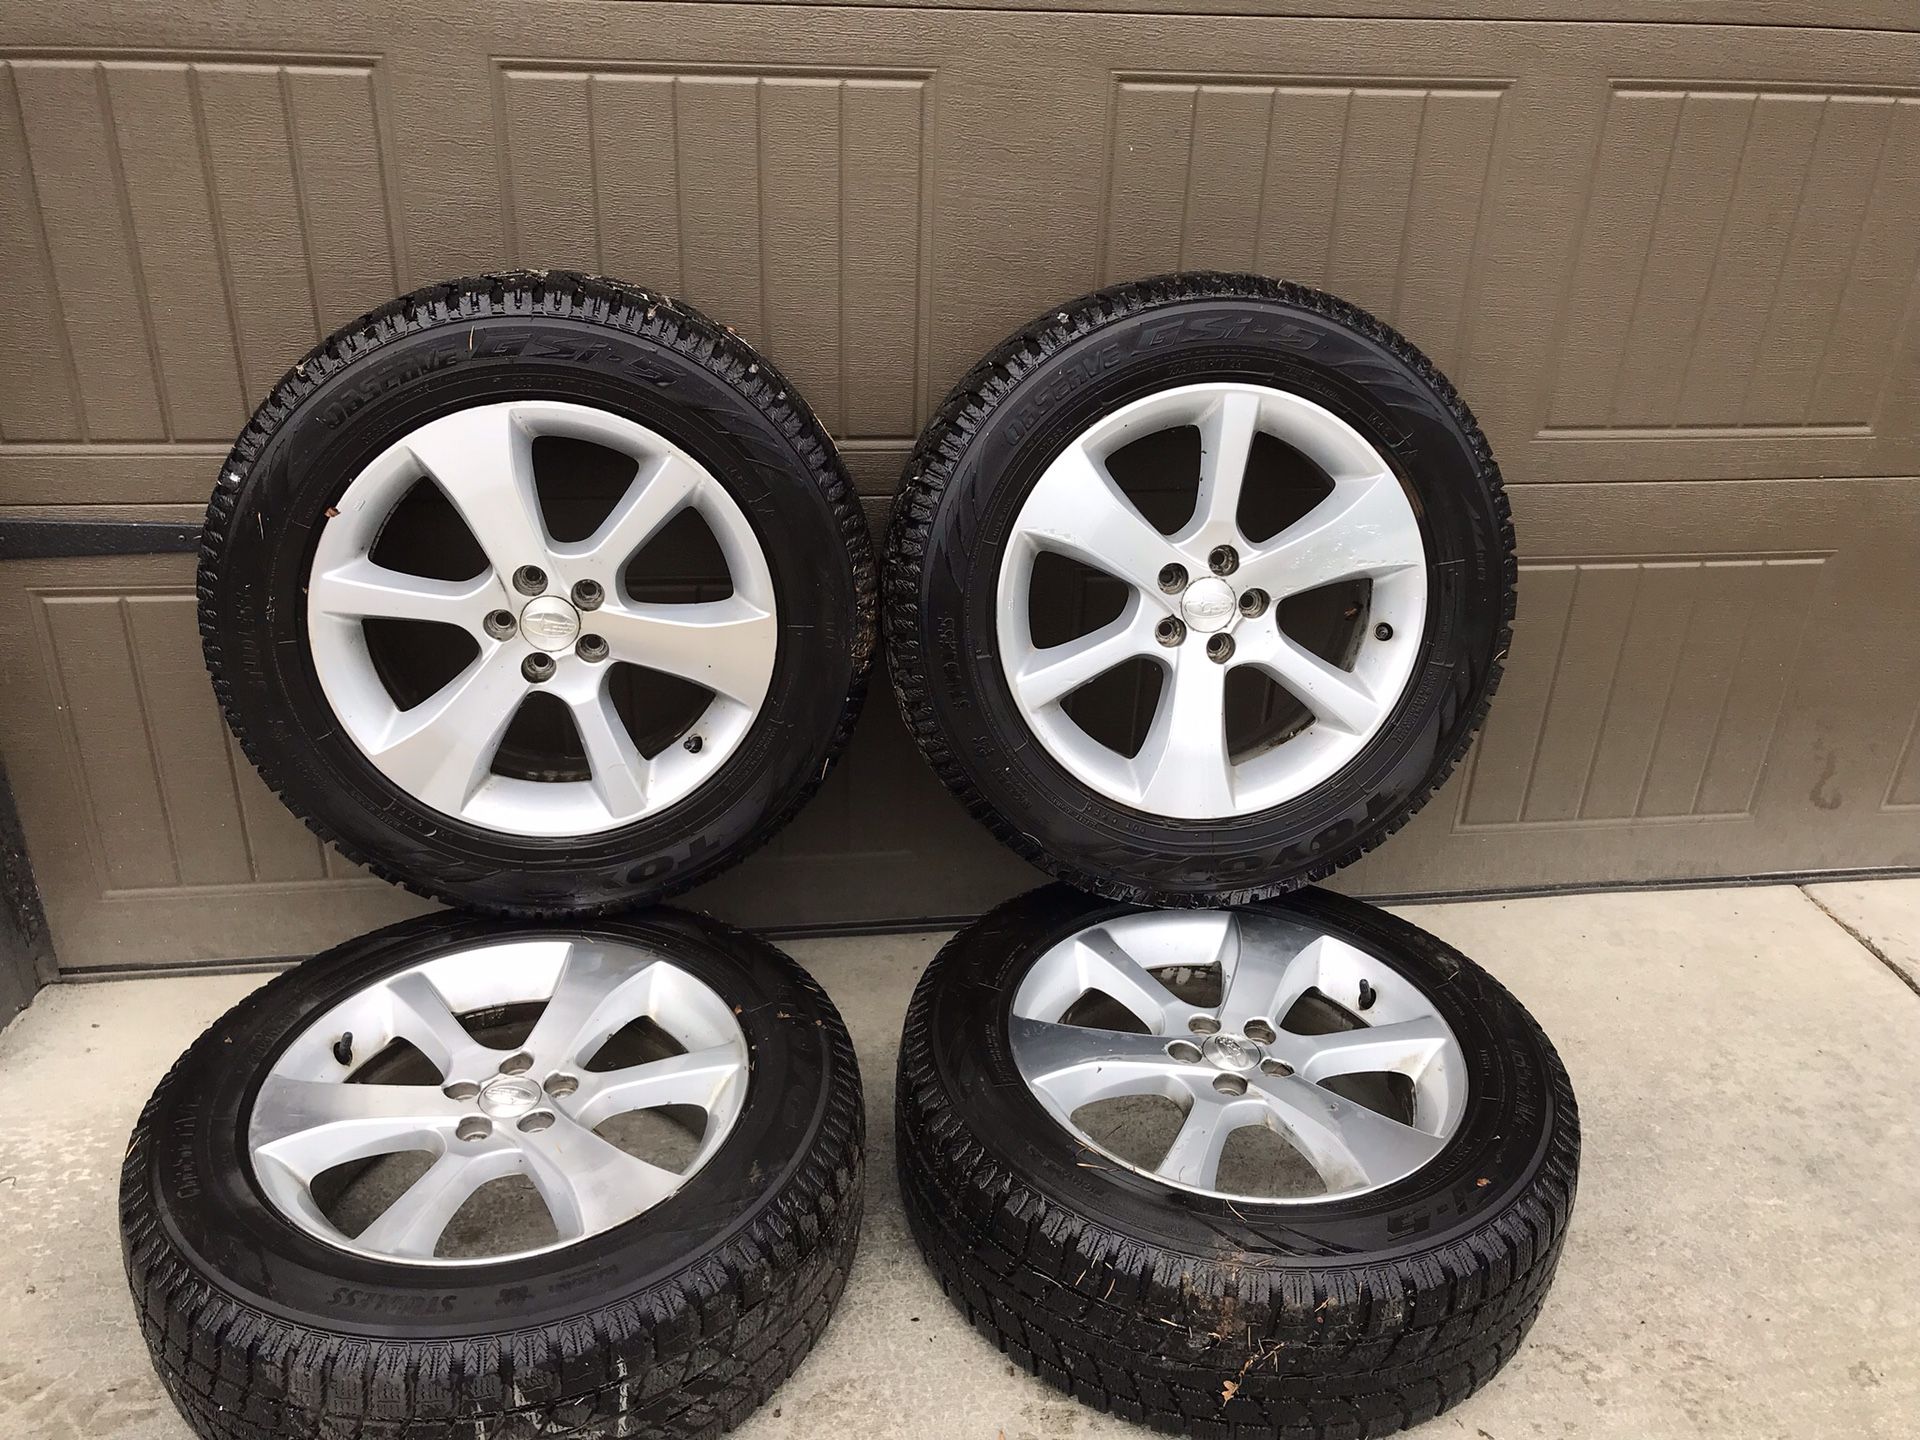 Studless snow tires